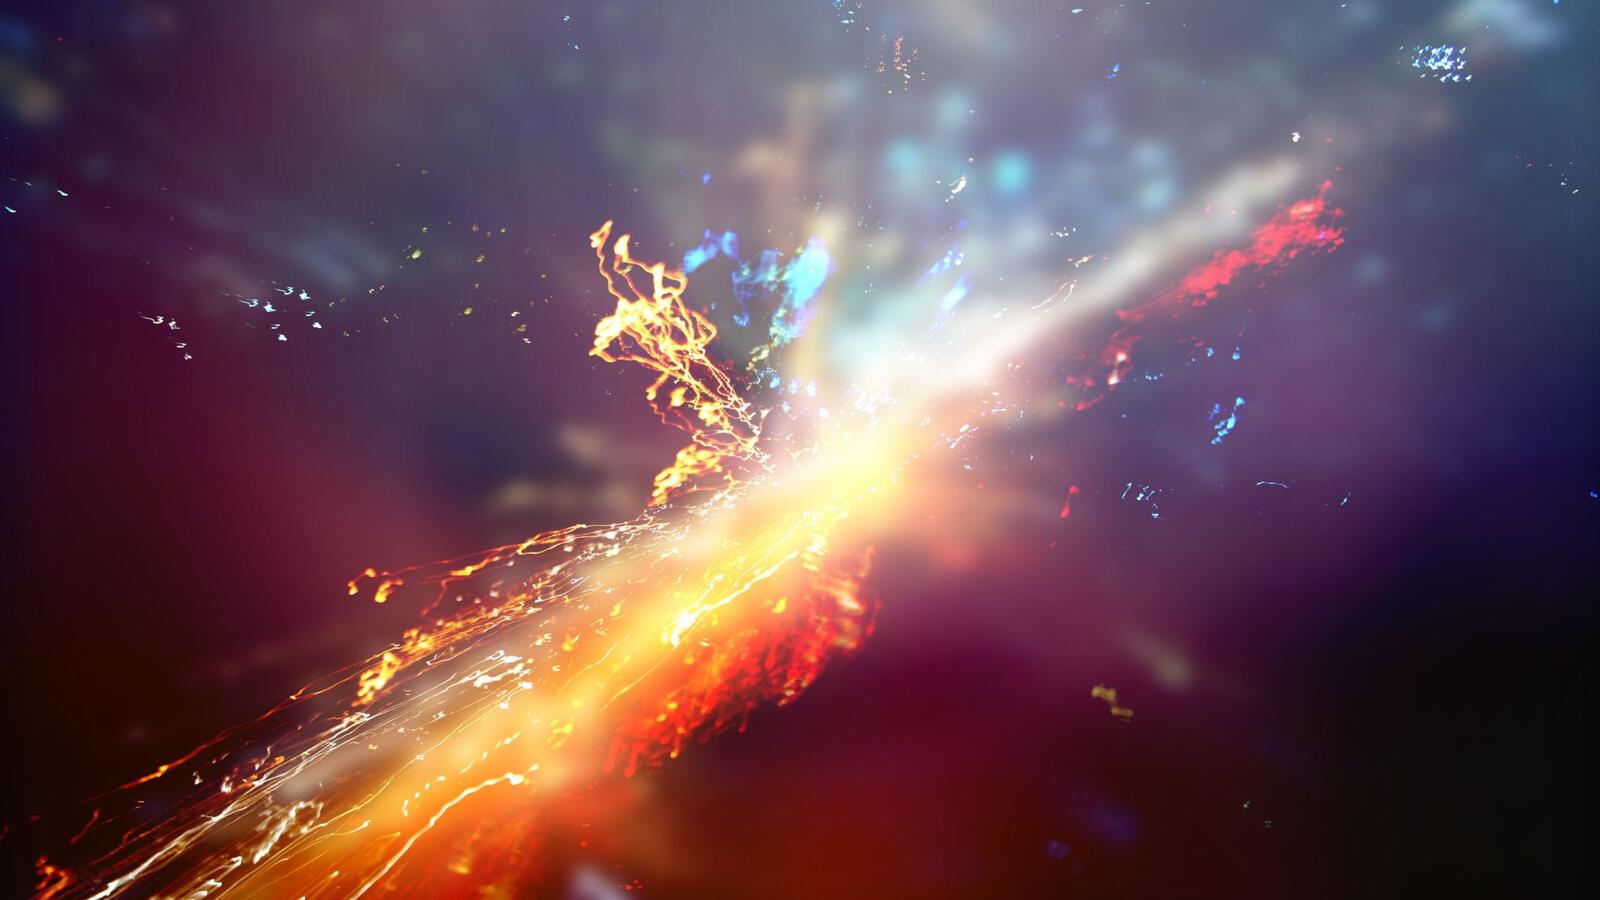 Wallpapers the explosion of colors explosions particles on the desktop